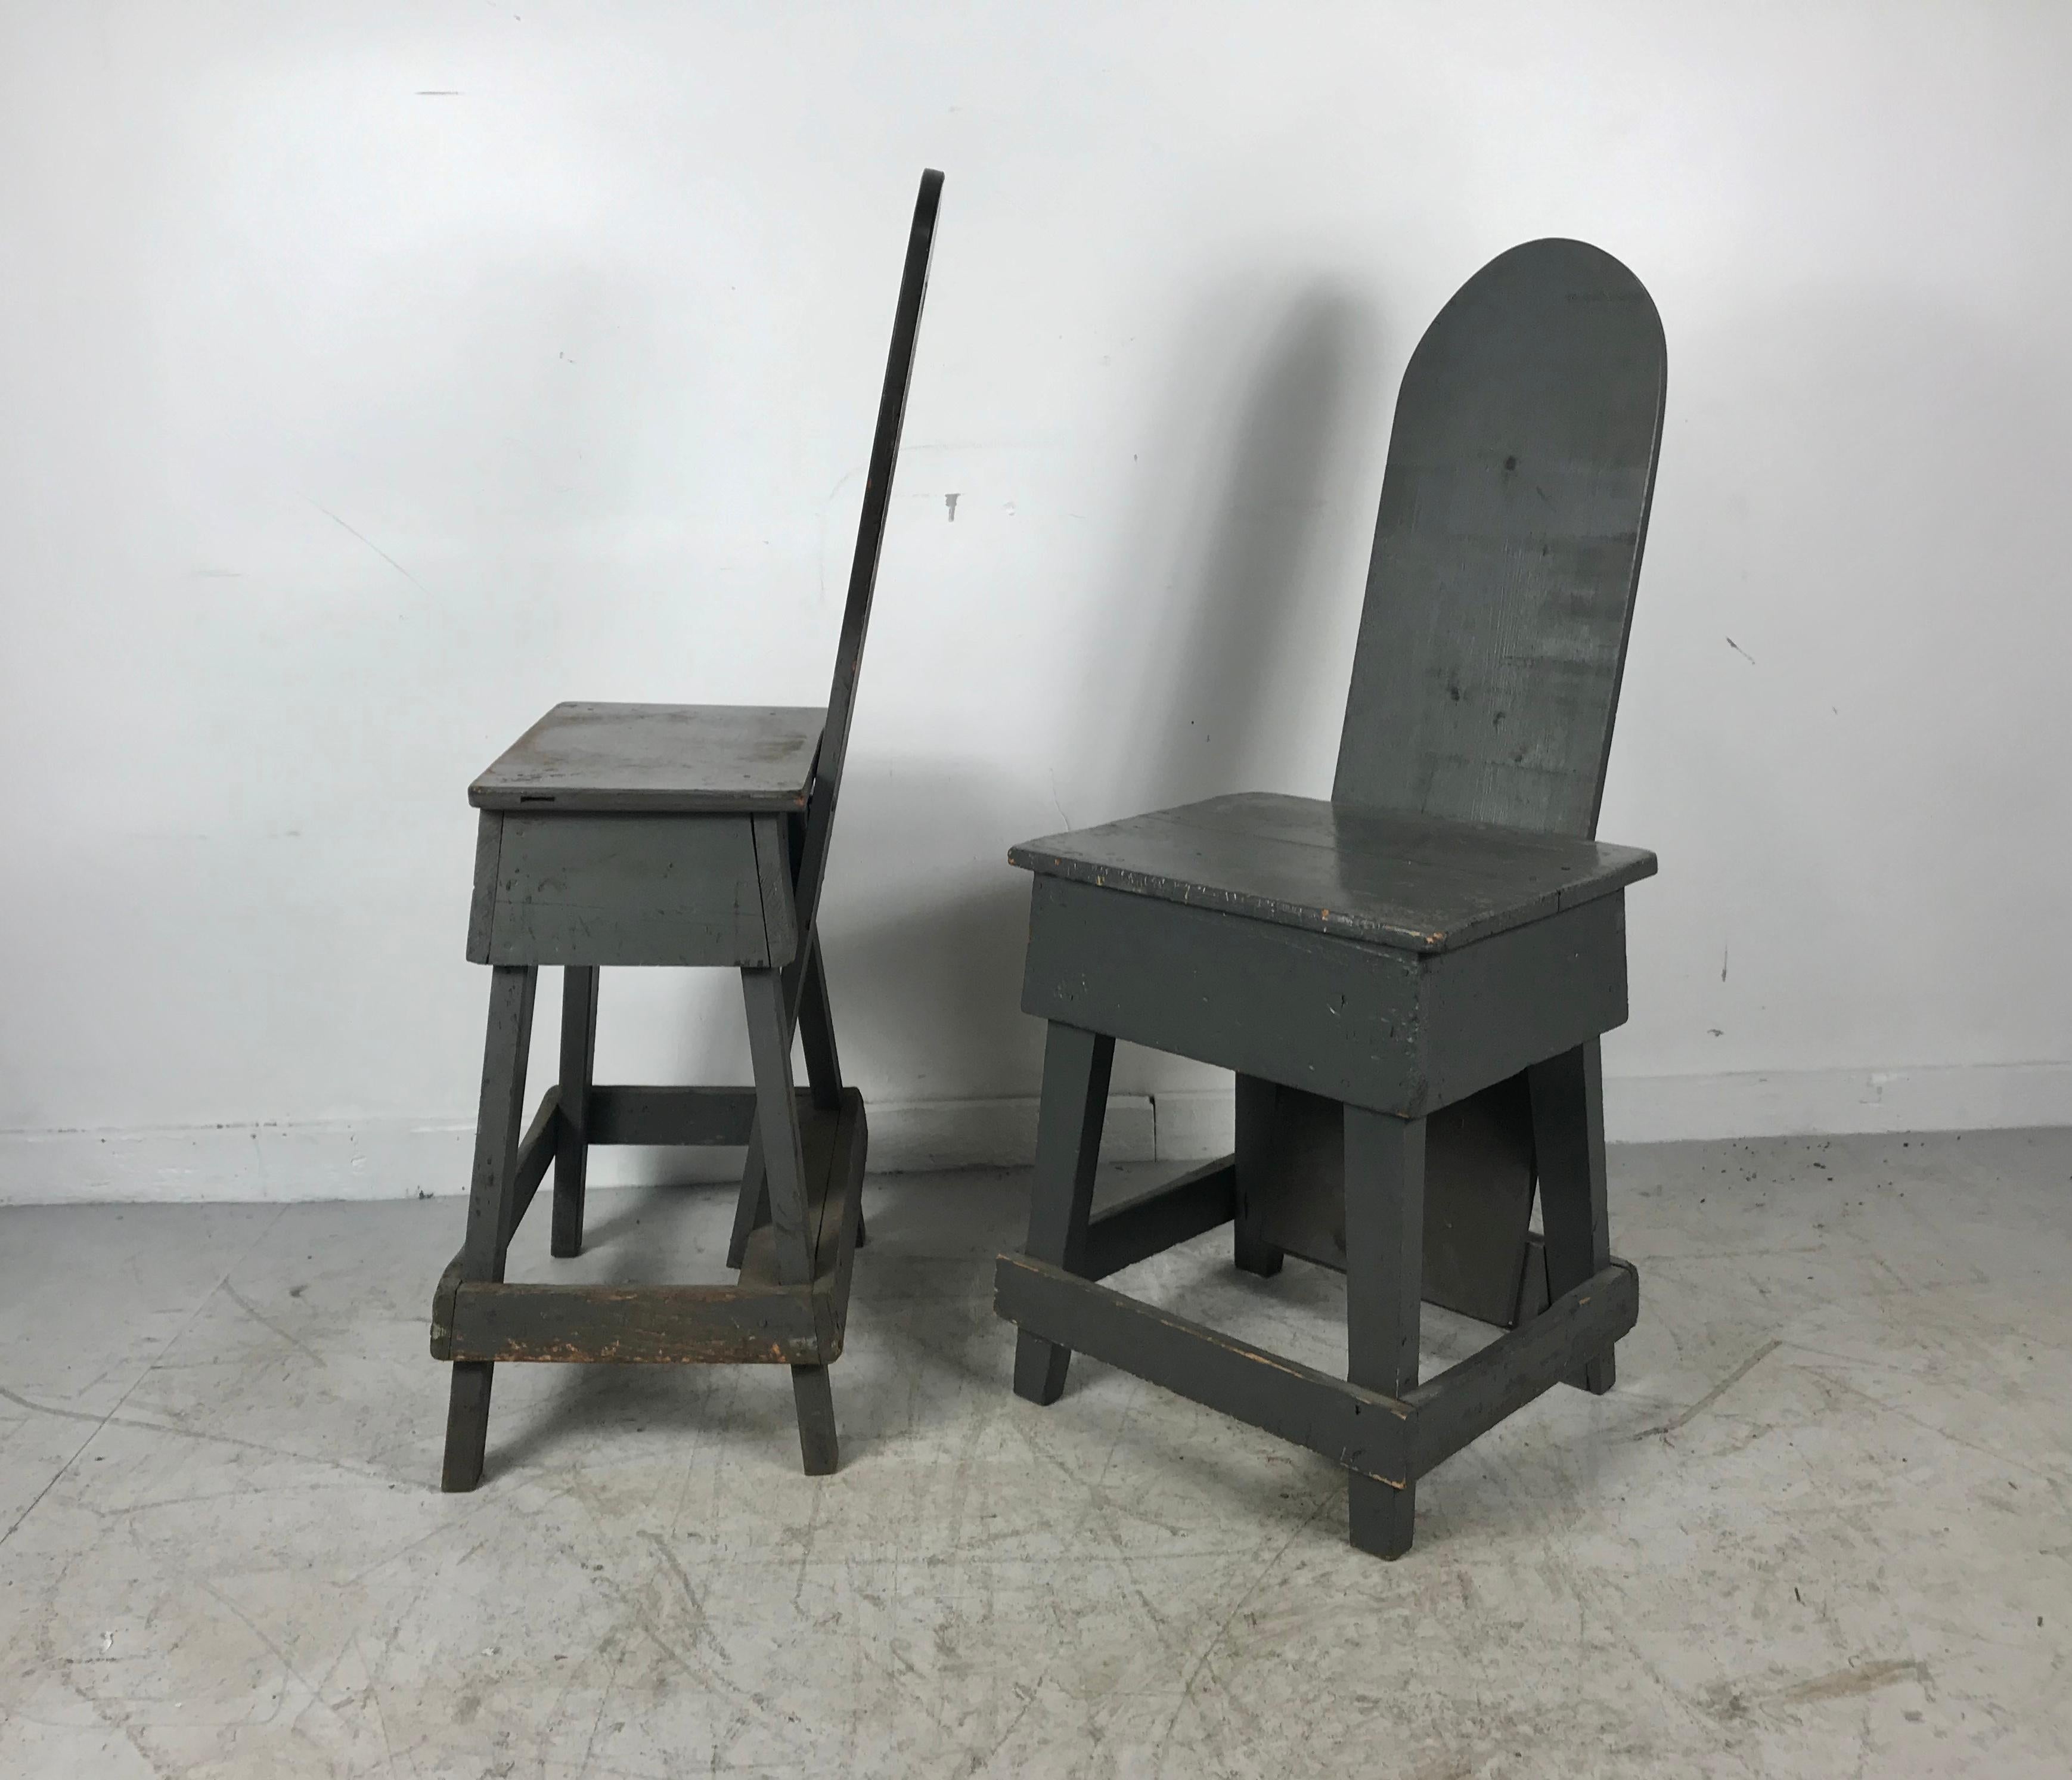 Unusual handmade factory task chairs, late 1920s, early 1930s. Retain original gray painted surface. Wonderful patina. Nice design.